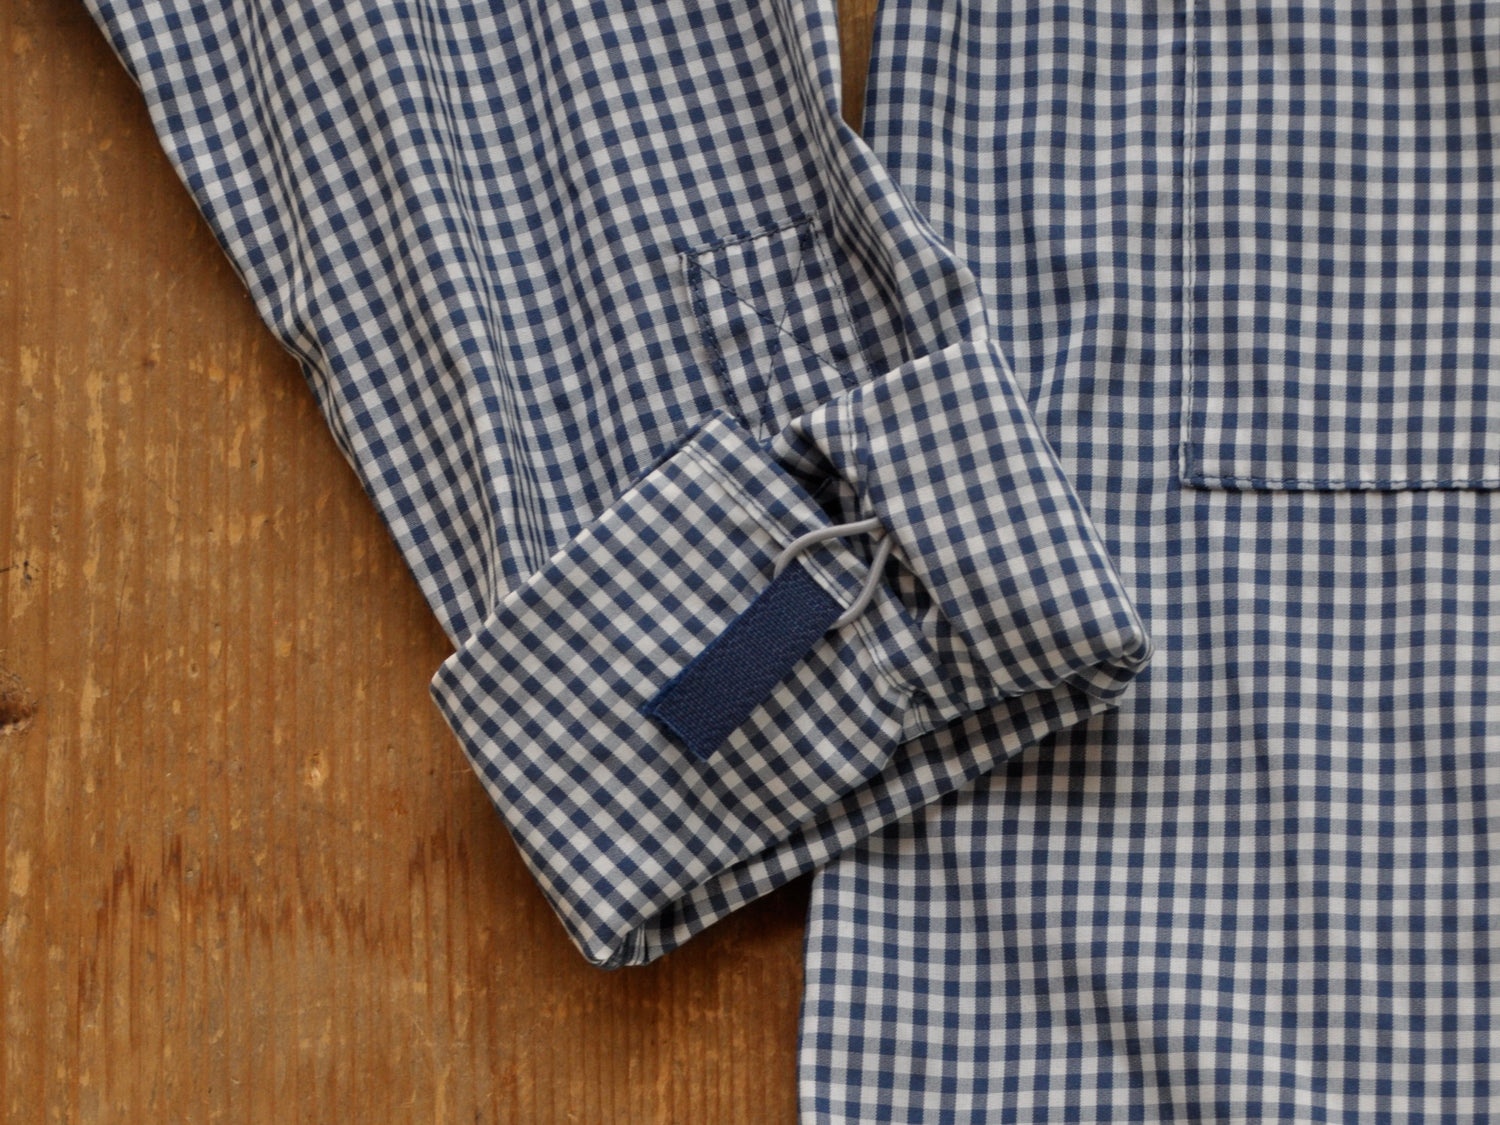 white and navy gingham shirt sleeves in detail